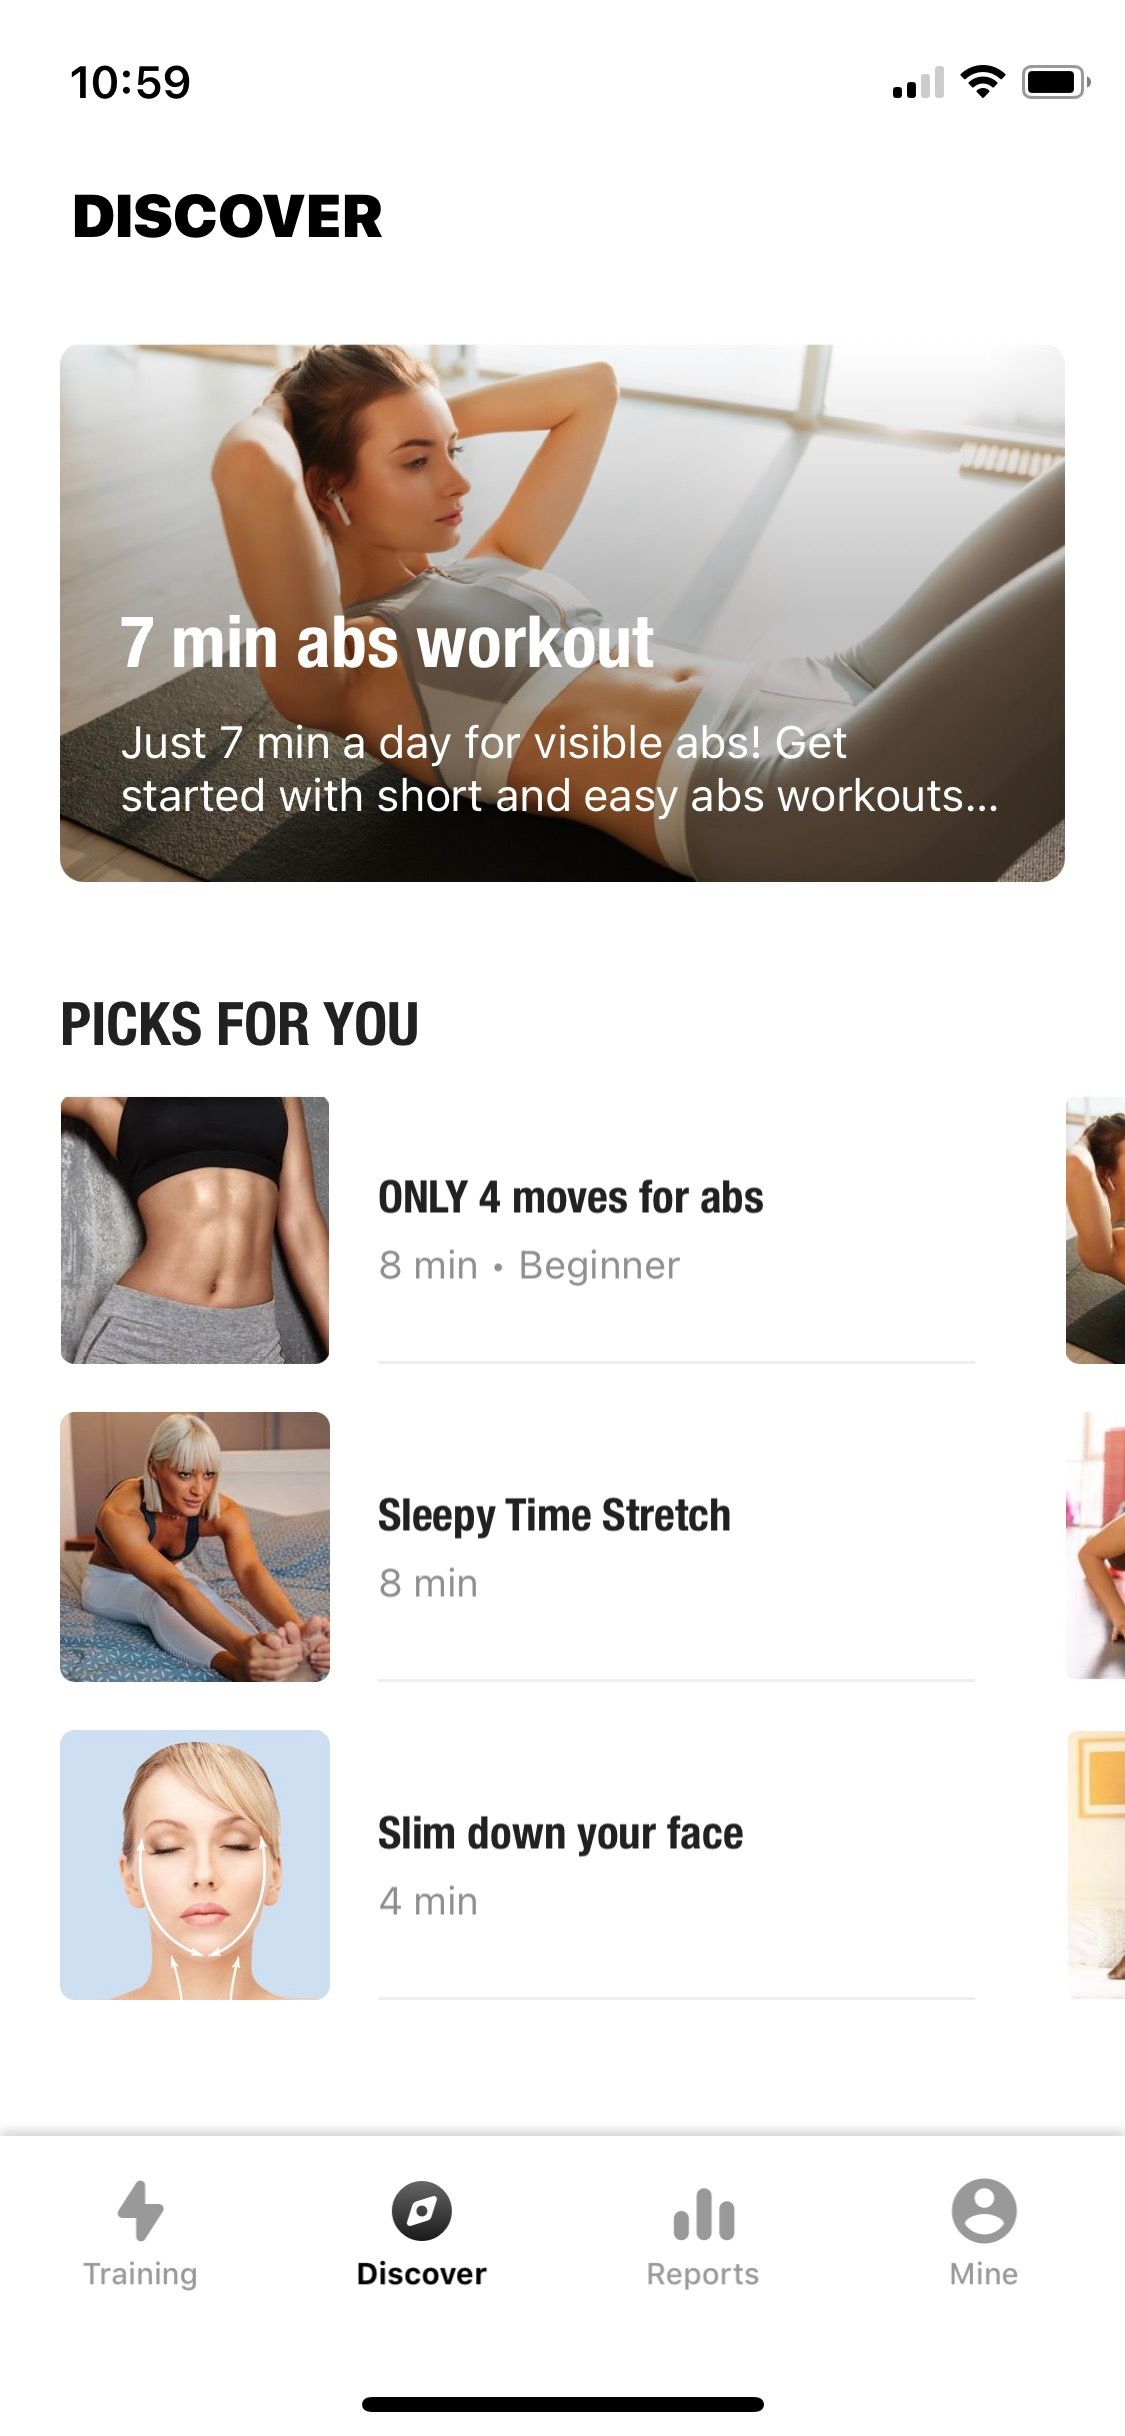 Screenshot of Lose Belly Fat showing Discover screen